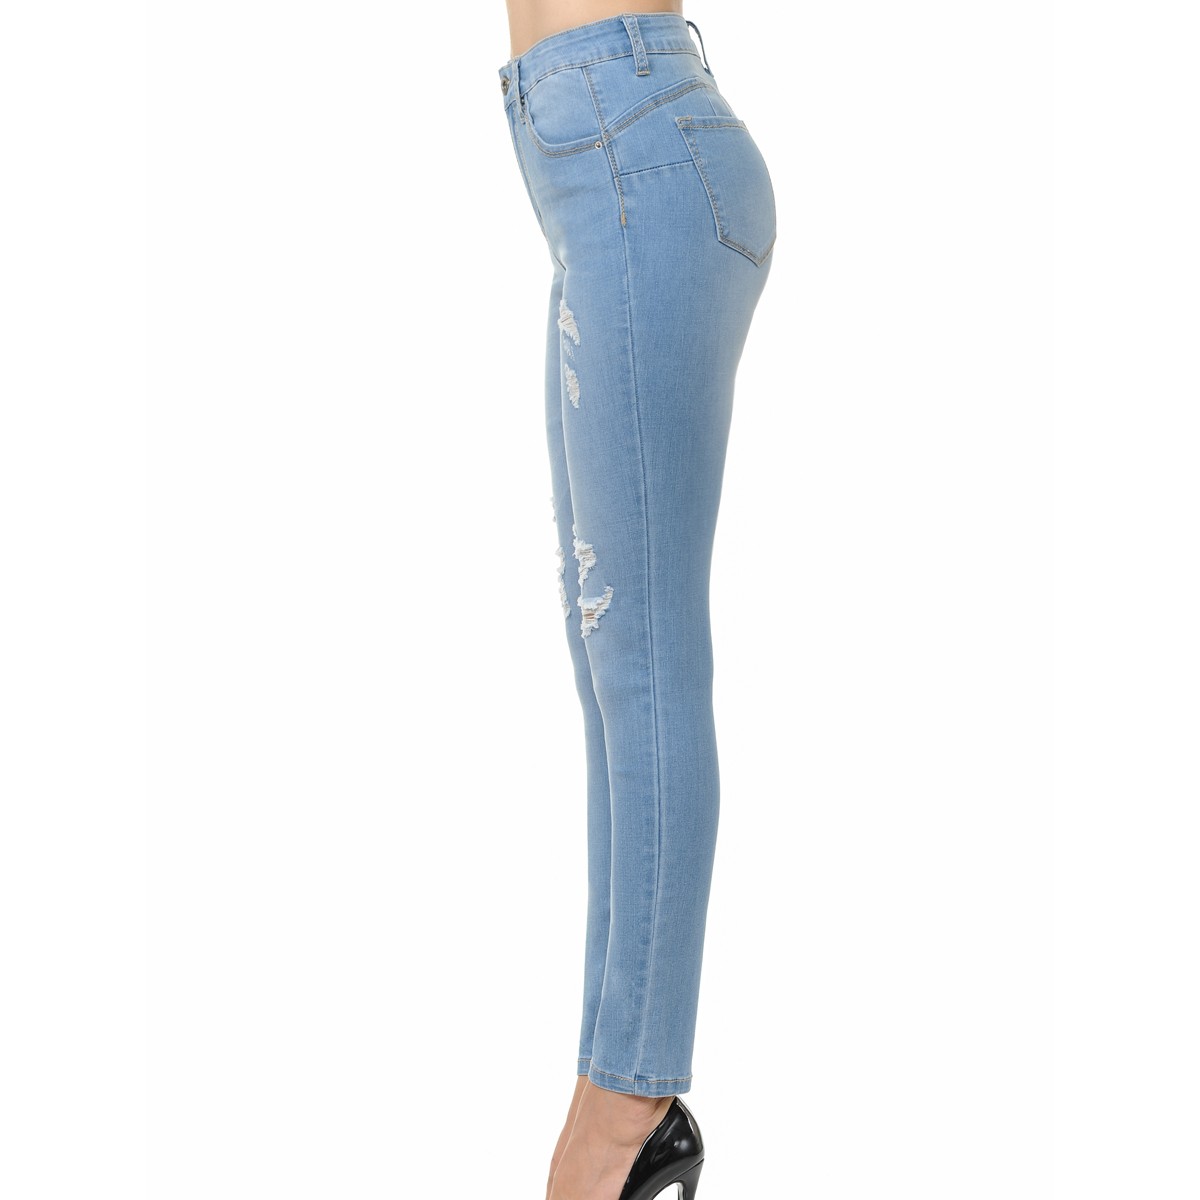 Wax Denim Womens Push-Up High-Rise Skinny Jeans with Destruction LIGH-11 - image 3 of 3